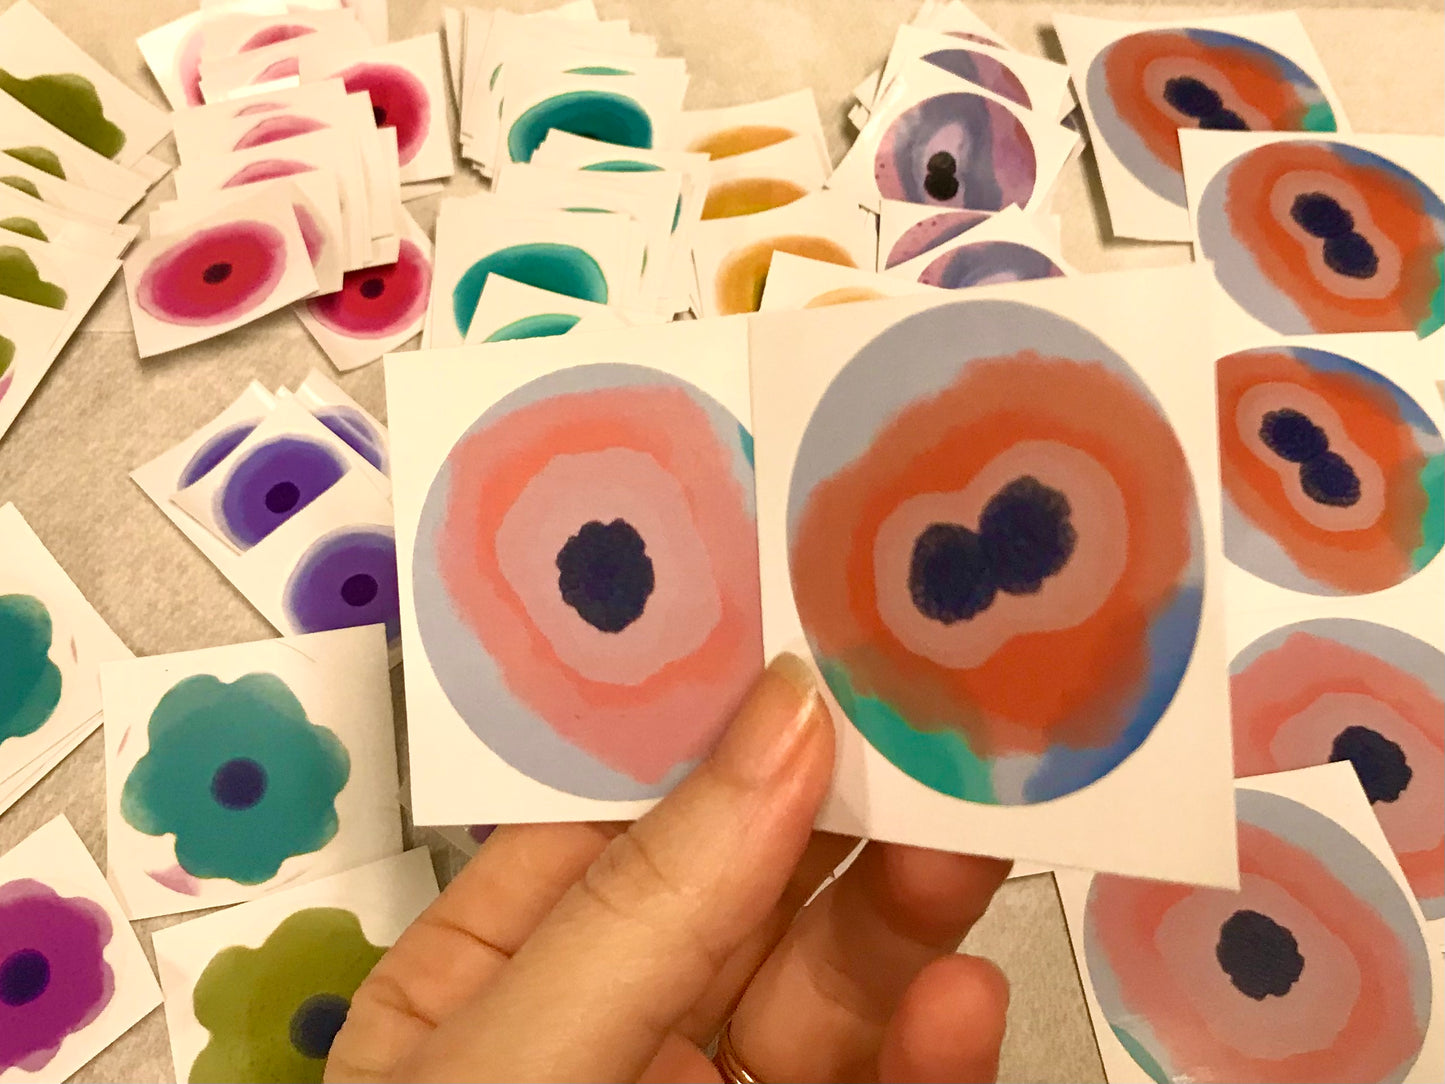 Round Stickers of colorful skin cell- Low-grade dysplasia squamous cell stickers.  Shows HPV affect or koilocytic changes.